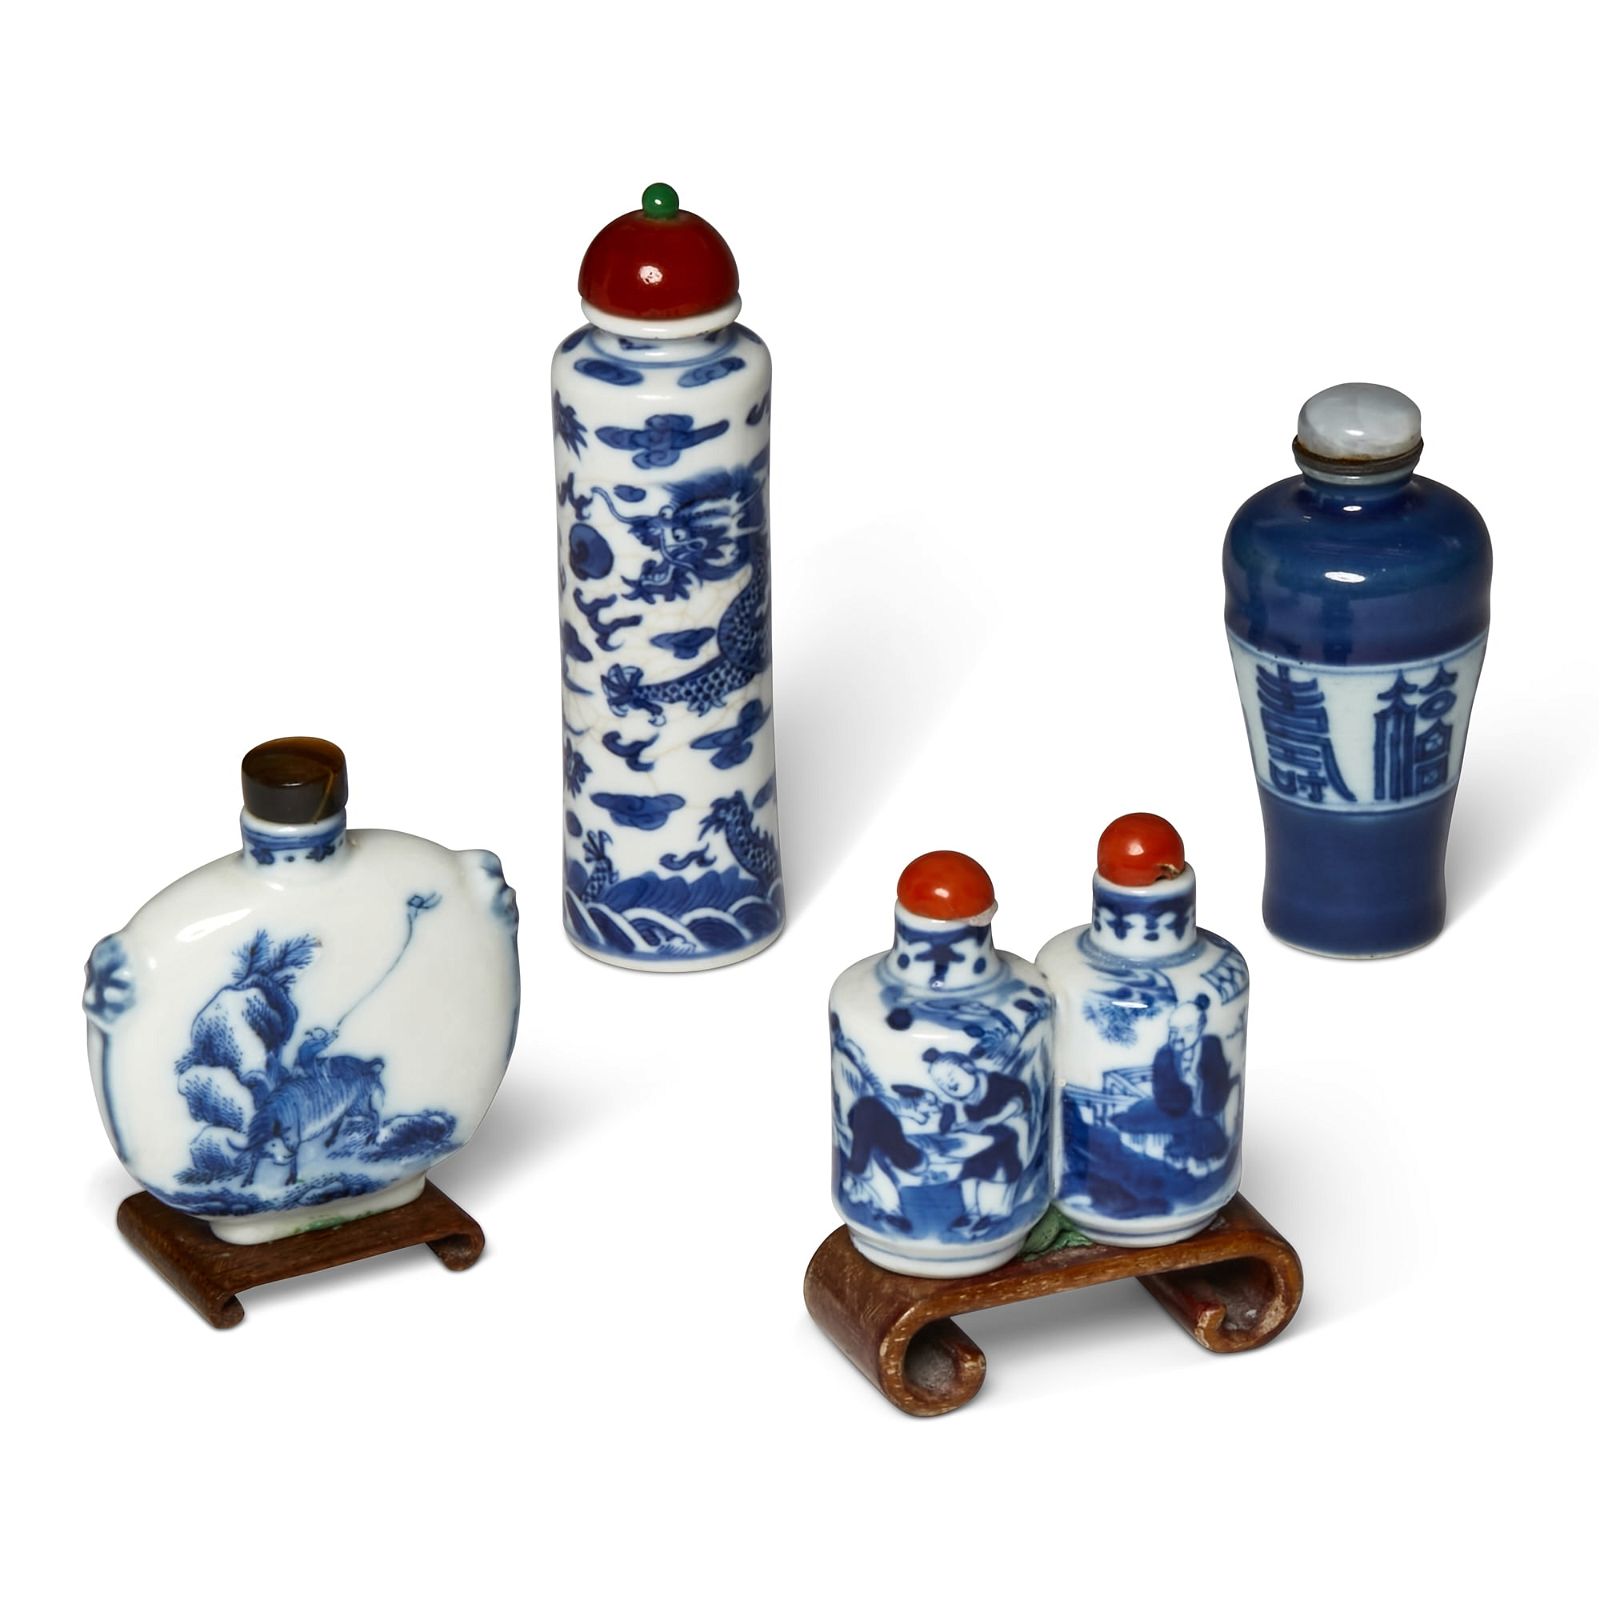 FOUR CHINESE PORCELAIN SNUFF BOTTLESFour